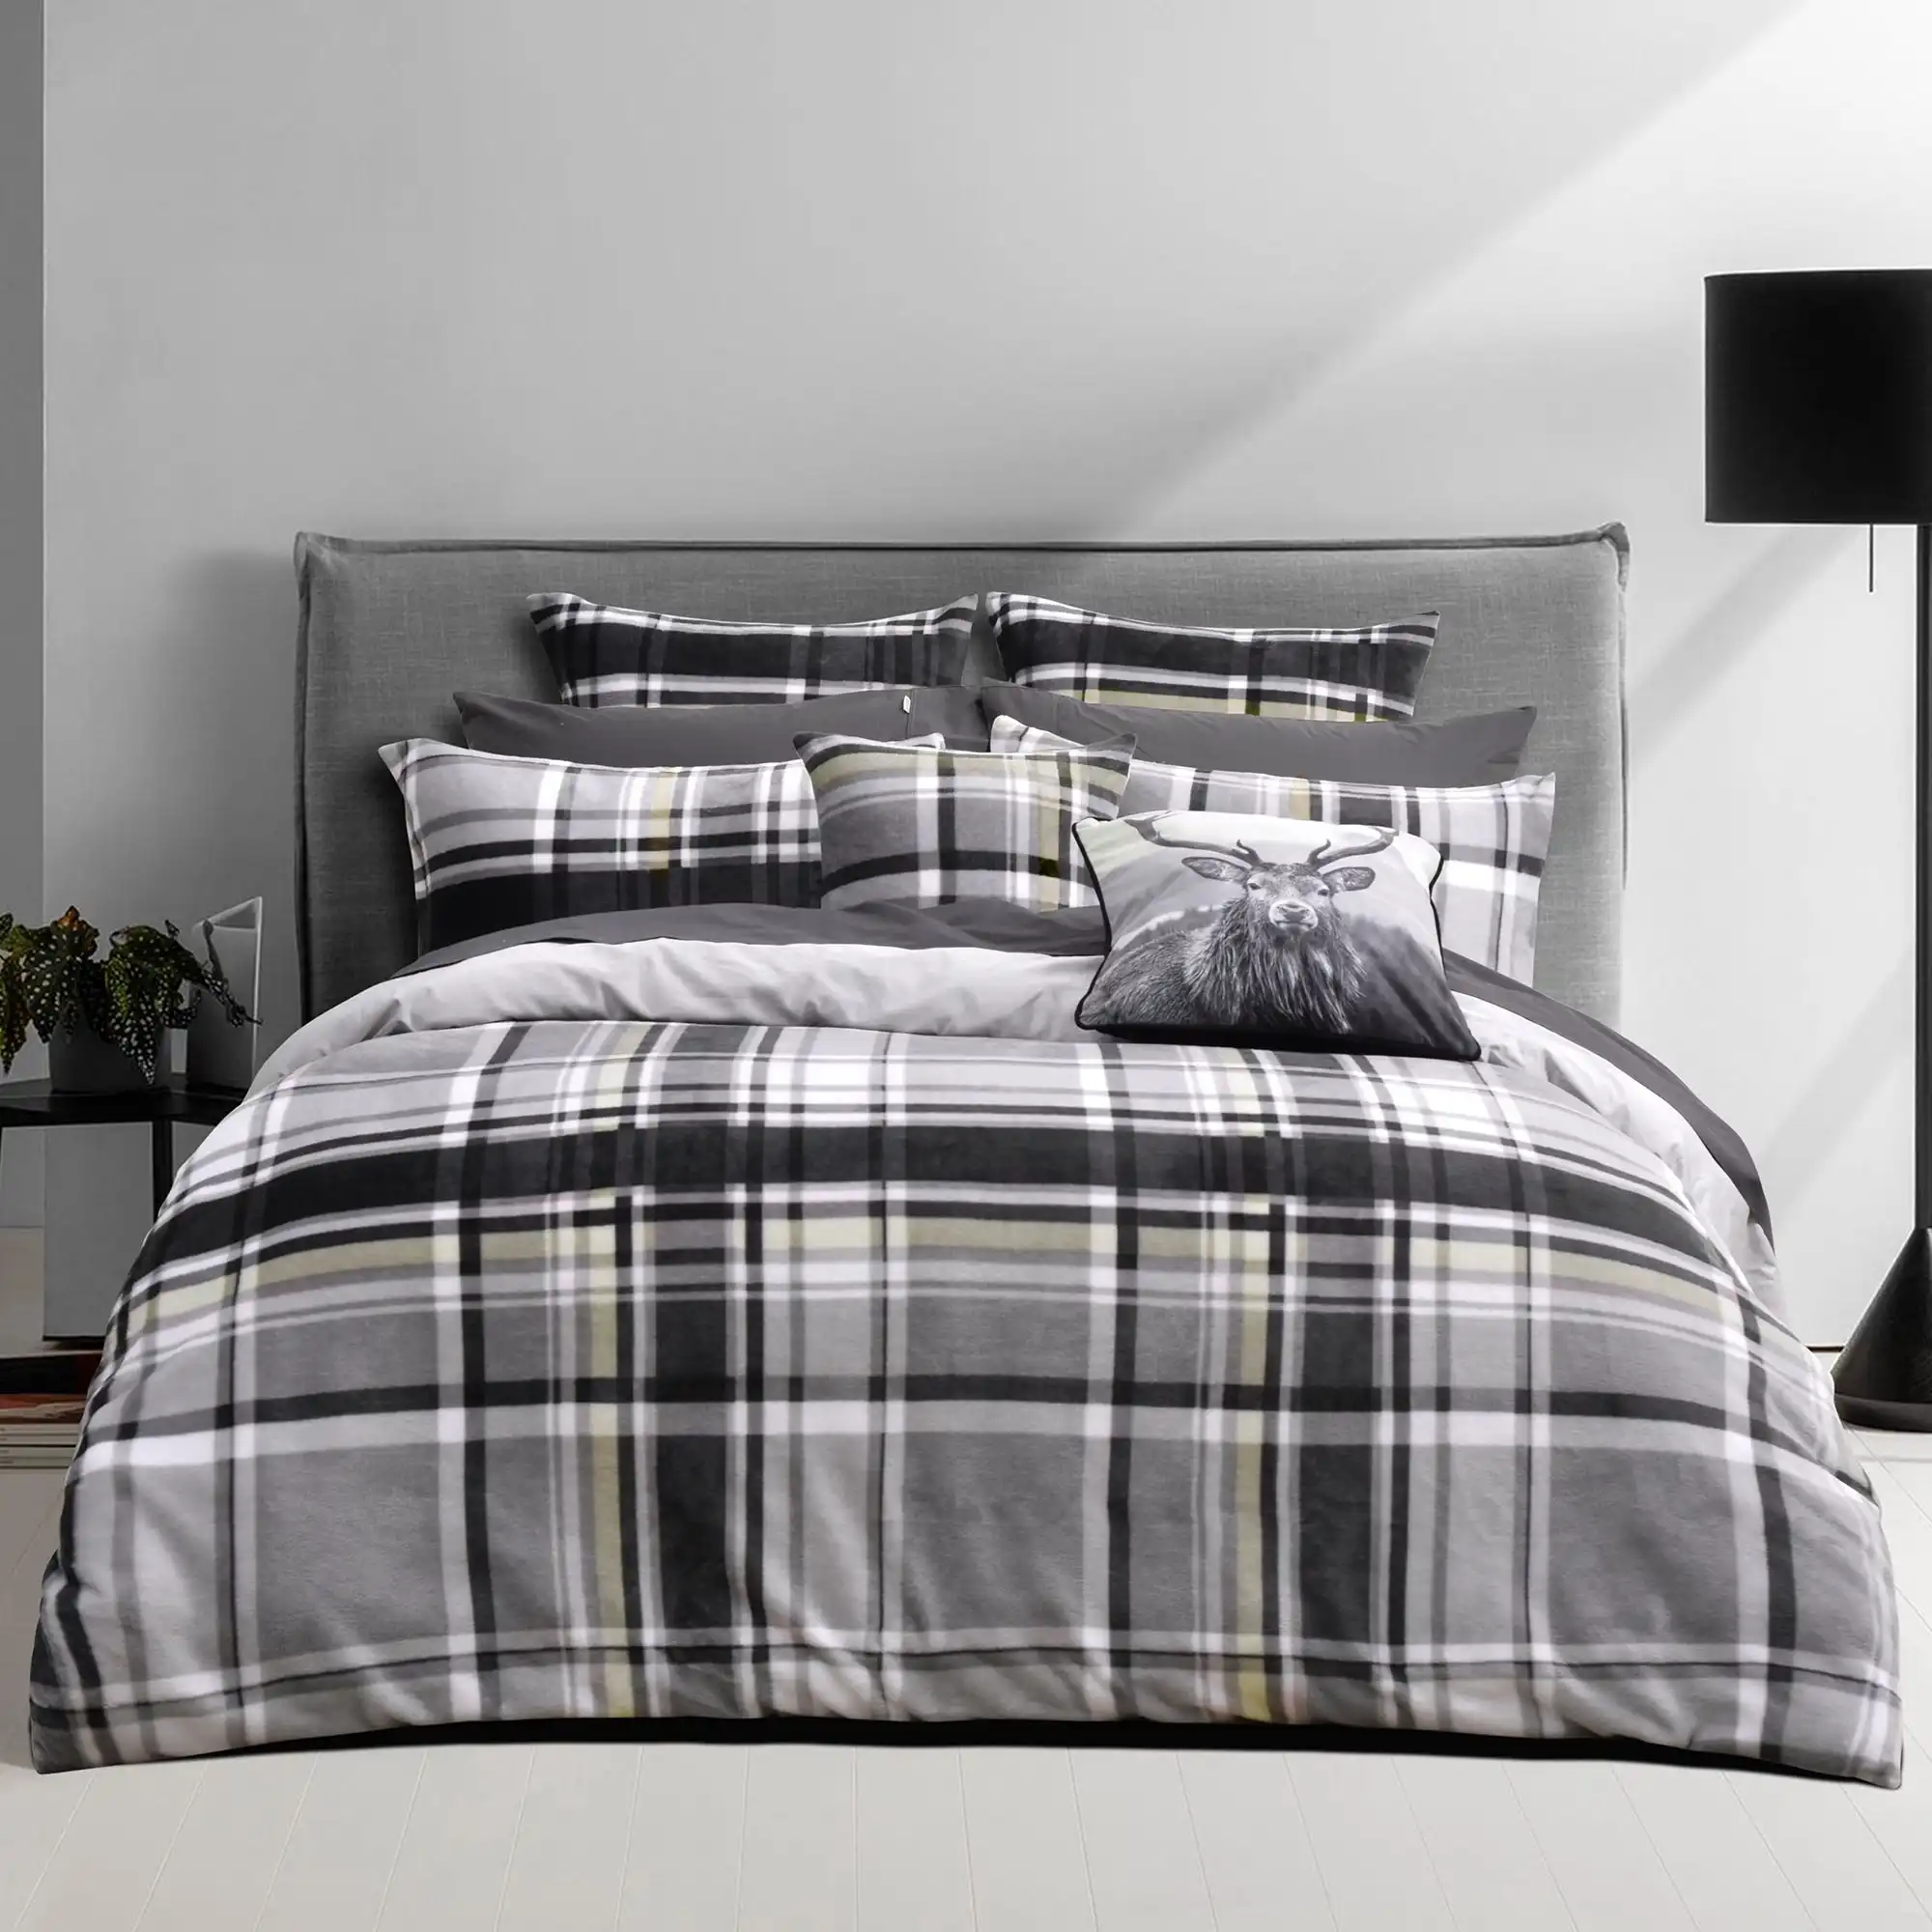 Bianca Bedding Chester Quilt Cover Set